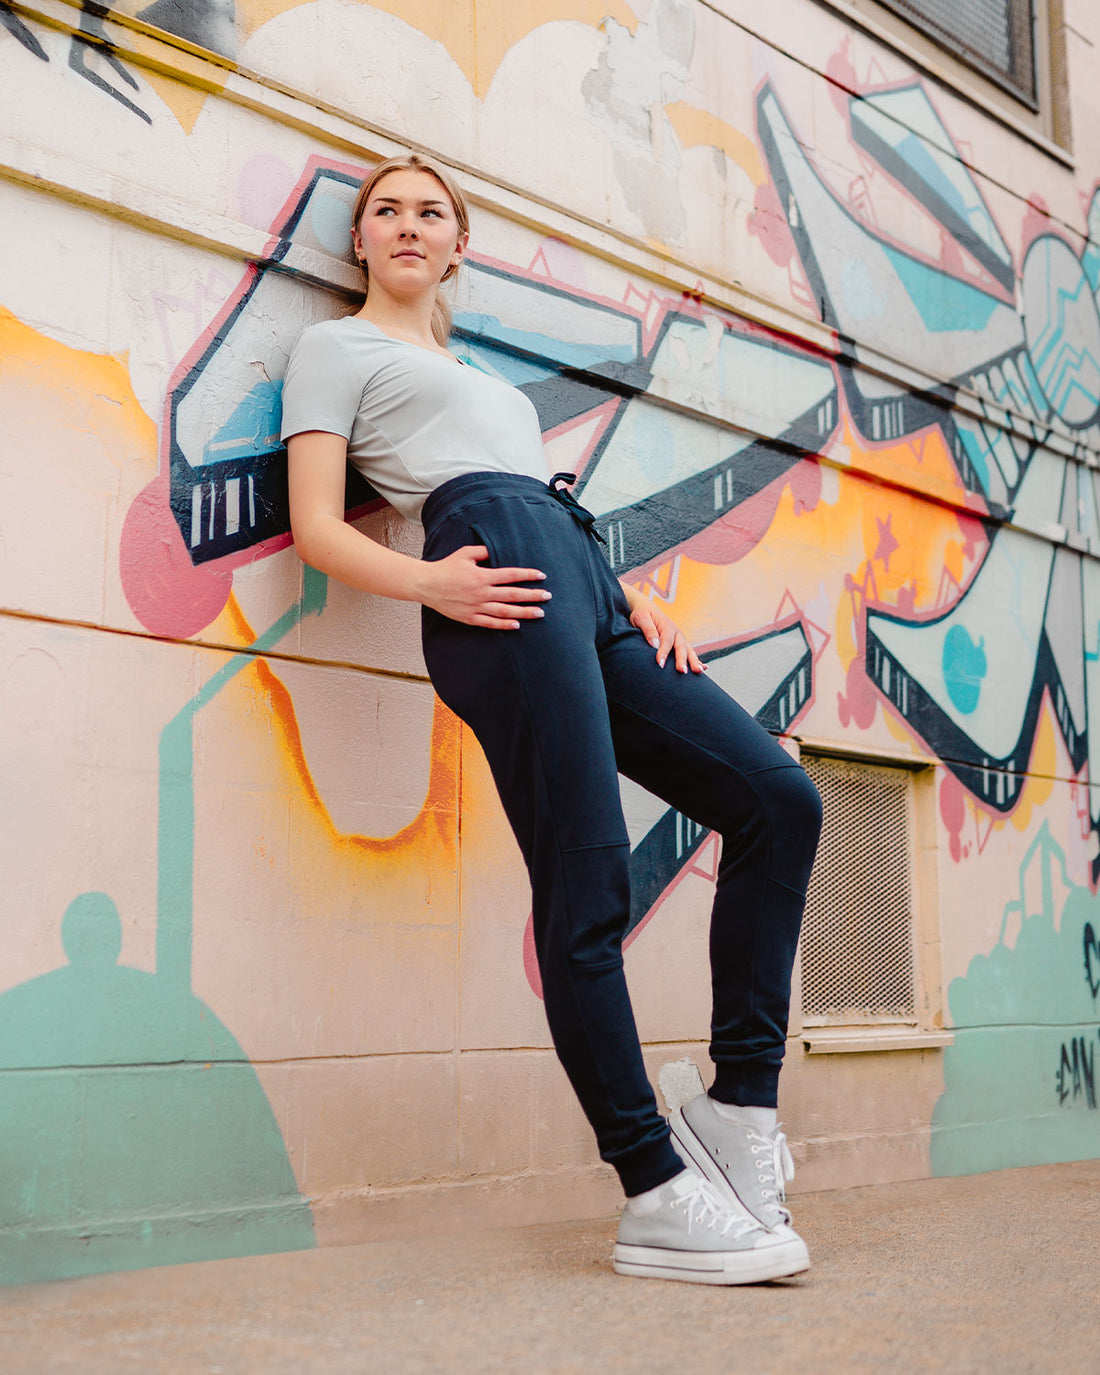 Tall Women's Sweatpants and Joggers – Where to Look + Tips!